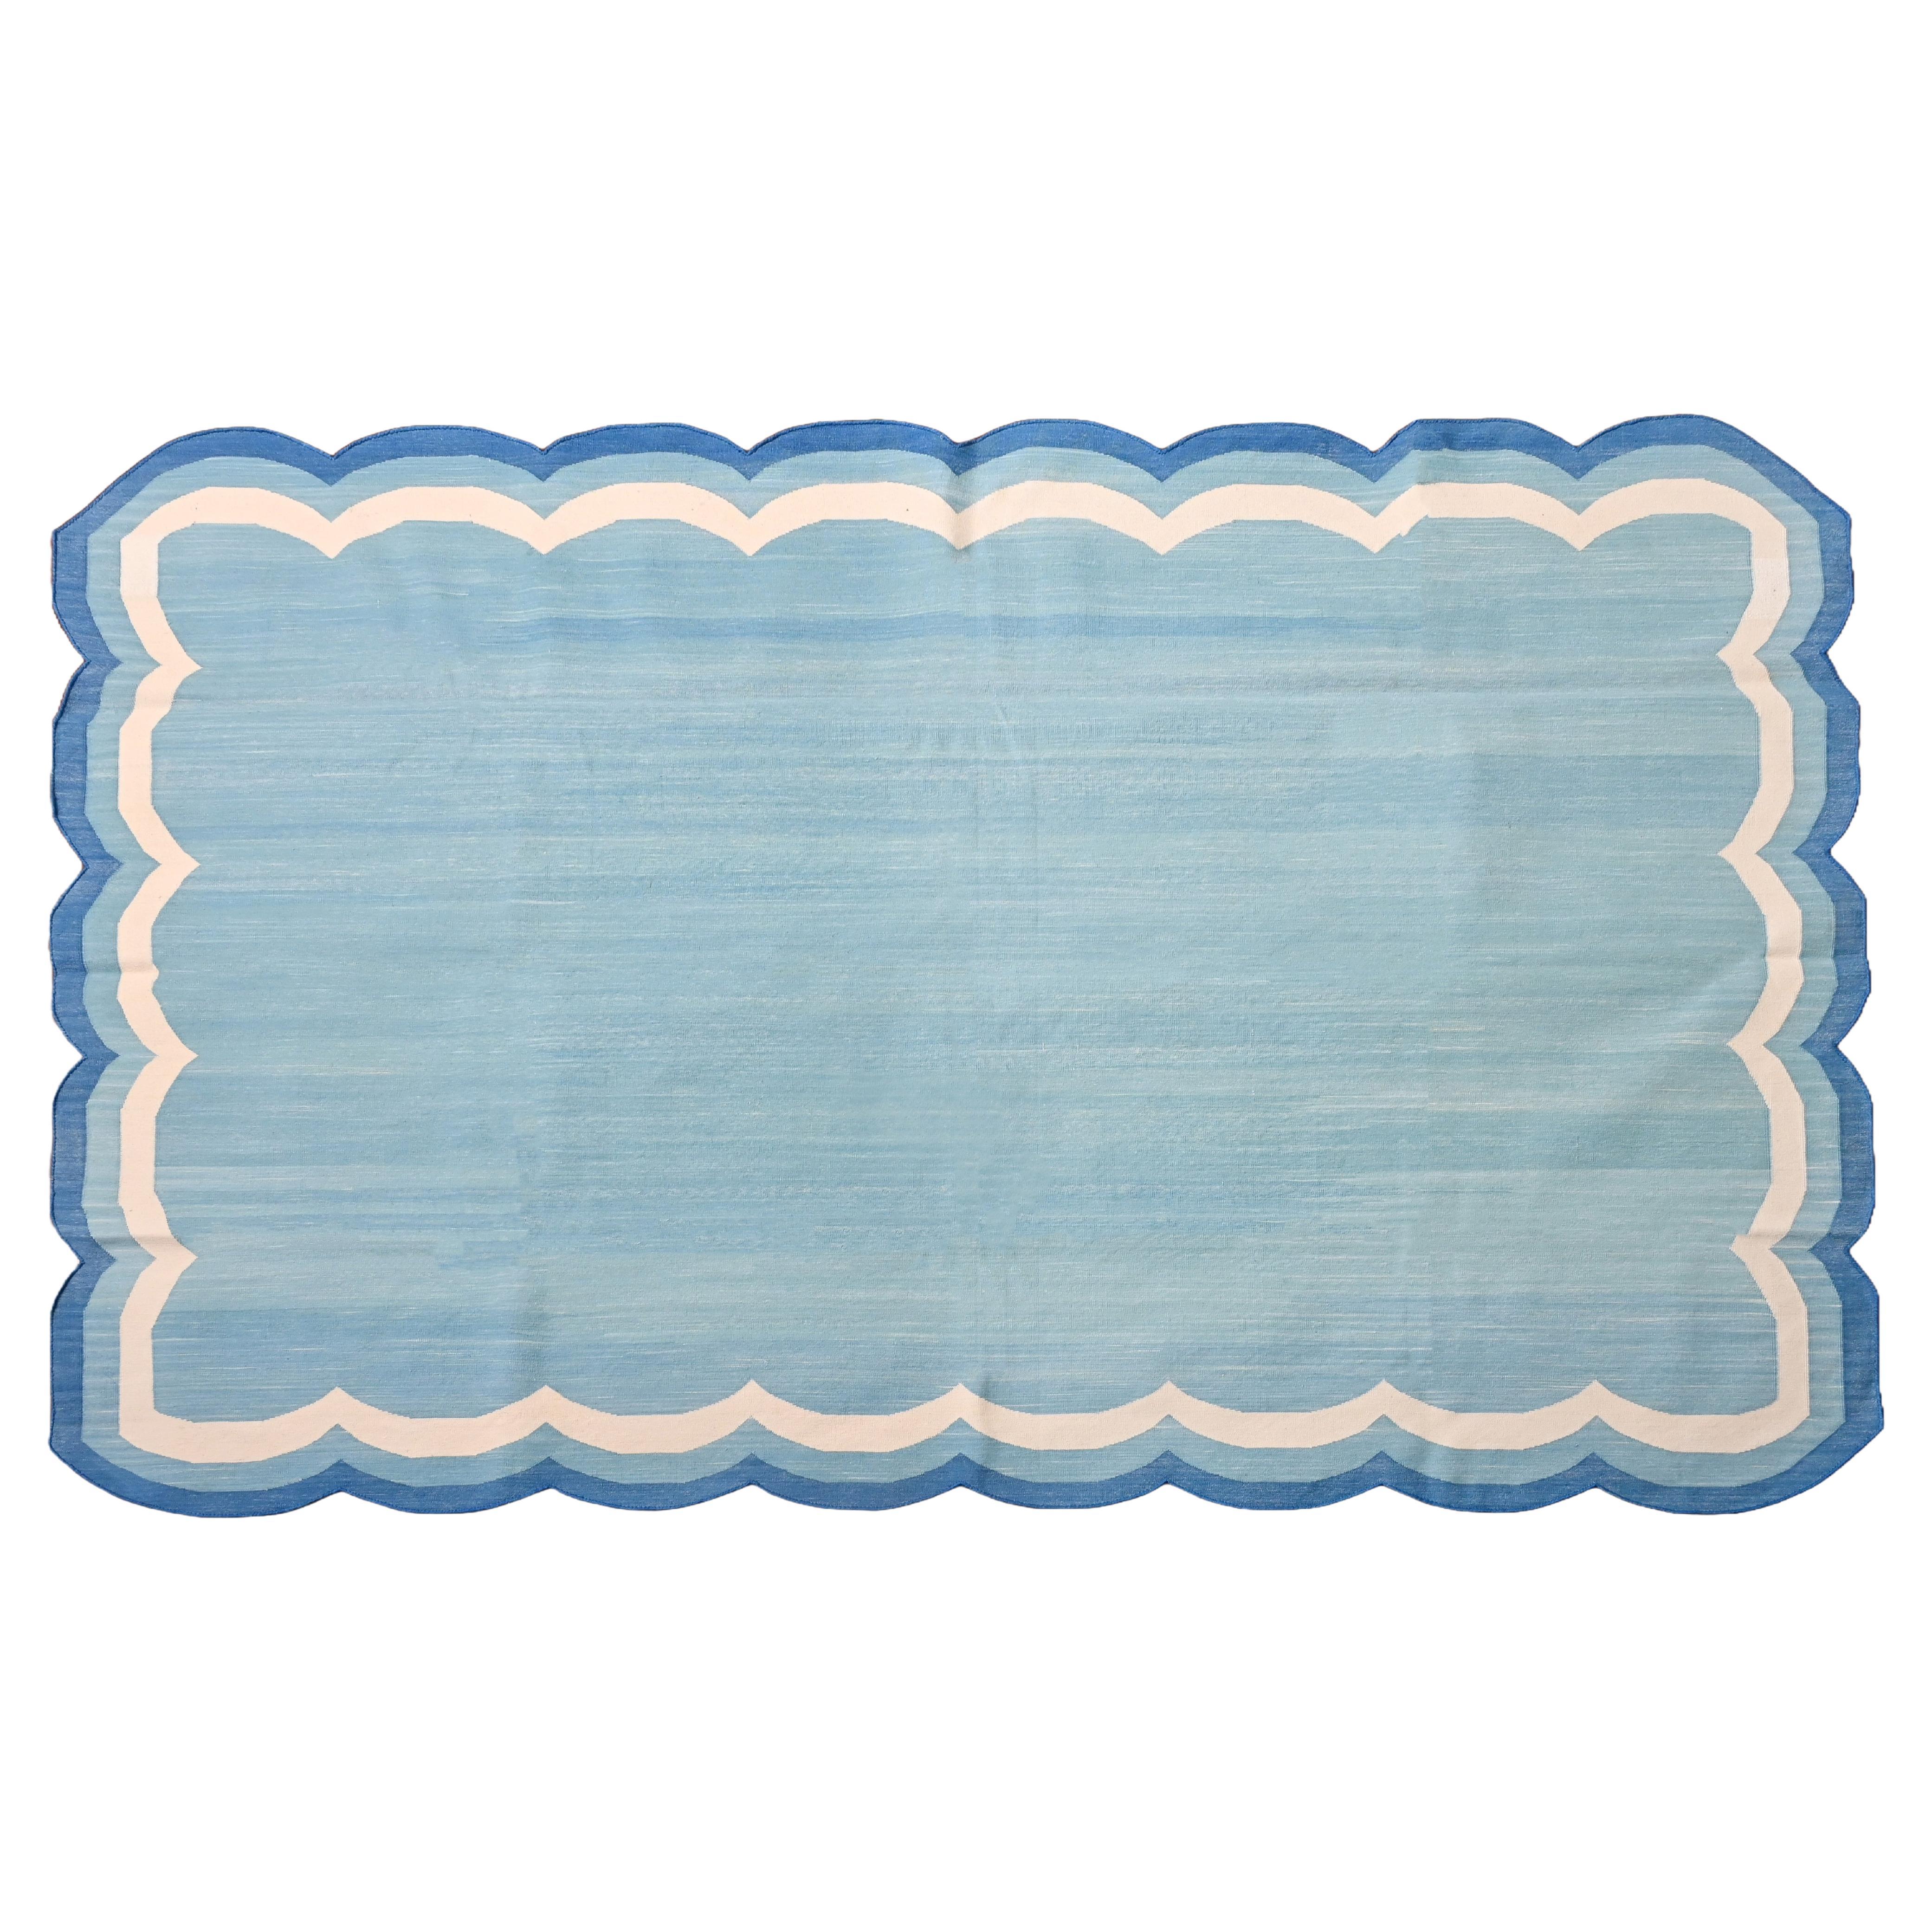 Handmade Cotton Area Flat Weave Rug, Teal Blue And White Scallop Indian Dhurrie